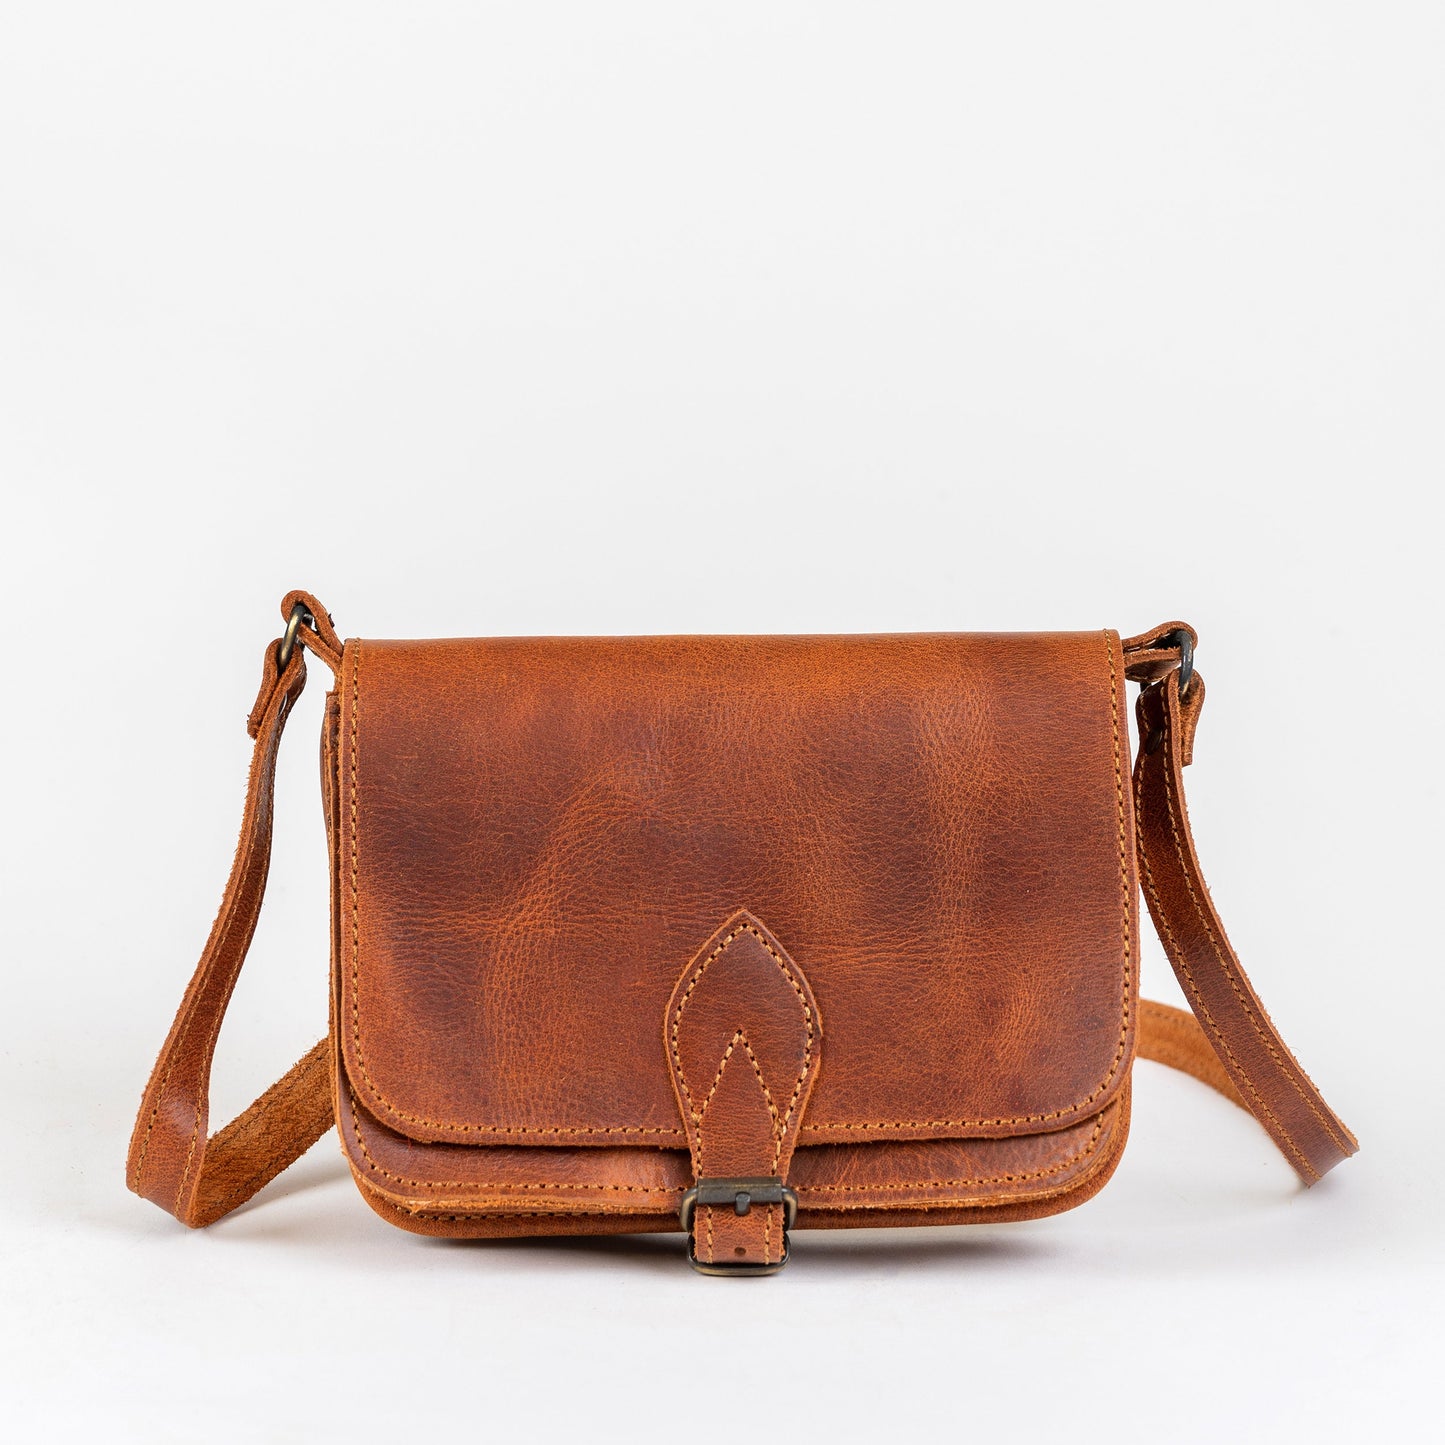 Leather crossbody bag for women, Leather mini saddle bag, Women's Leather Accessories